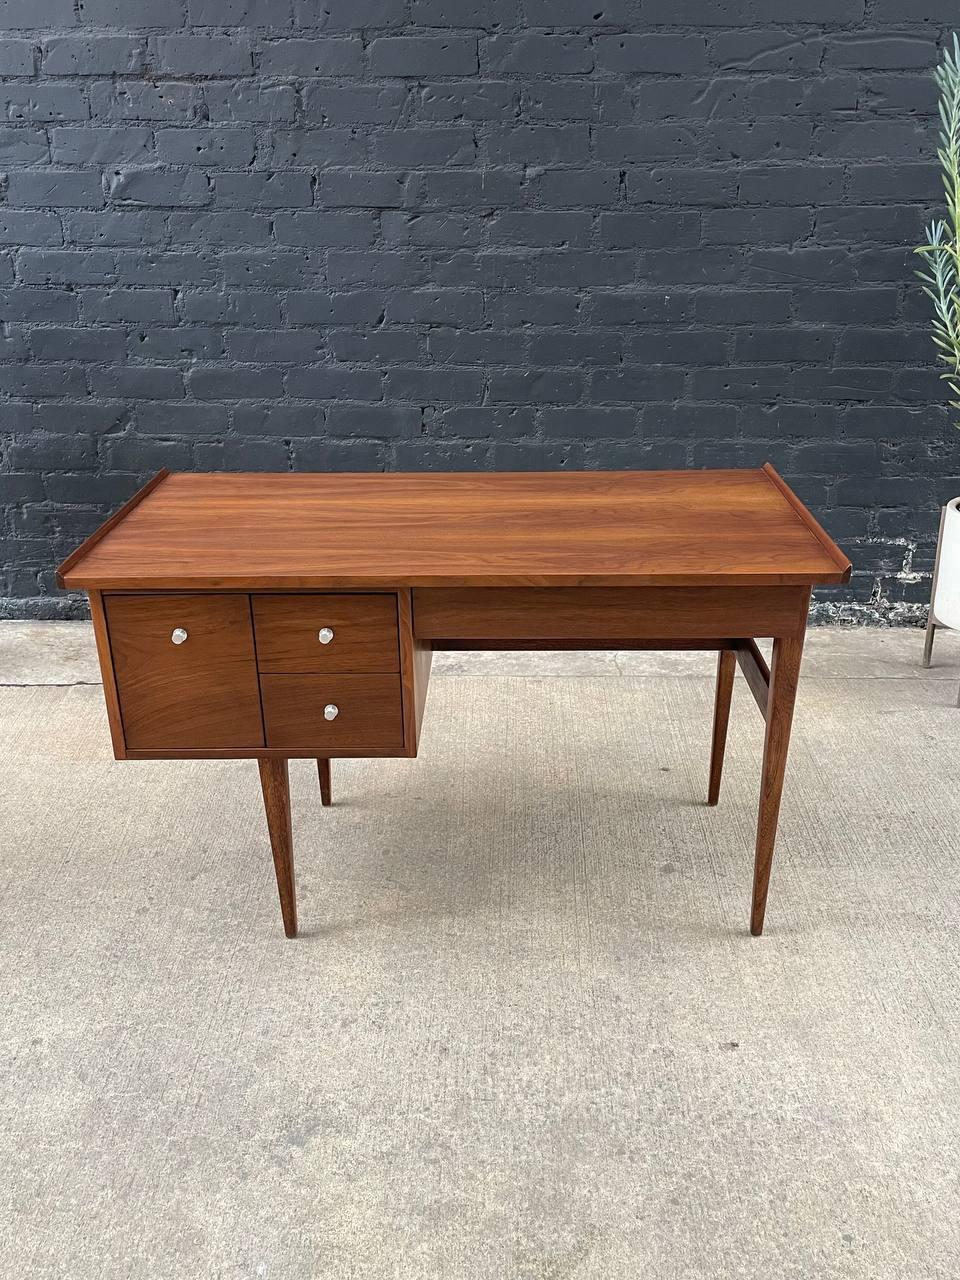 Mid-20th Century Mid-Century Modern Sculpted Walnut Desk by American of Martinsville For Sale